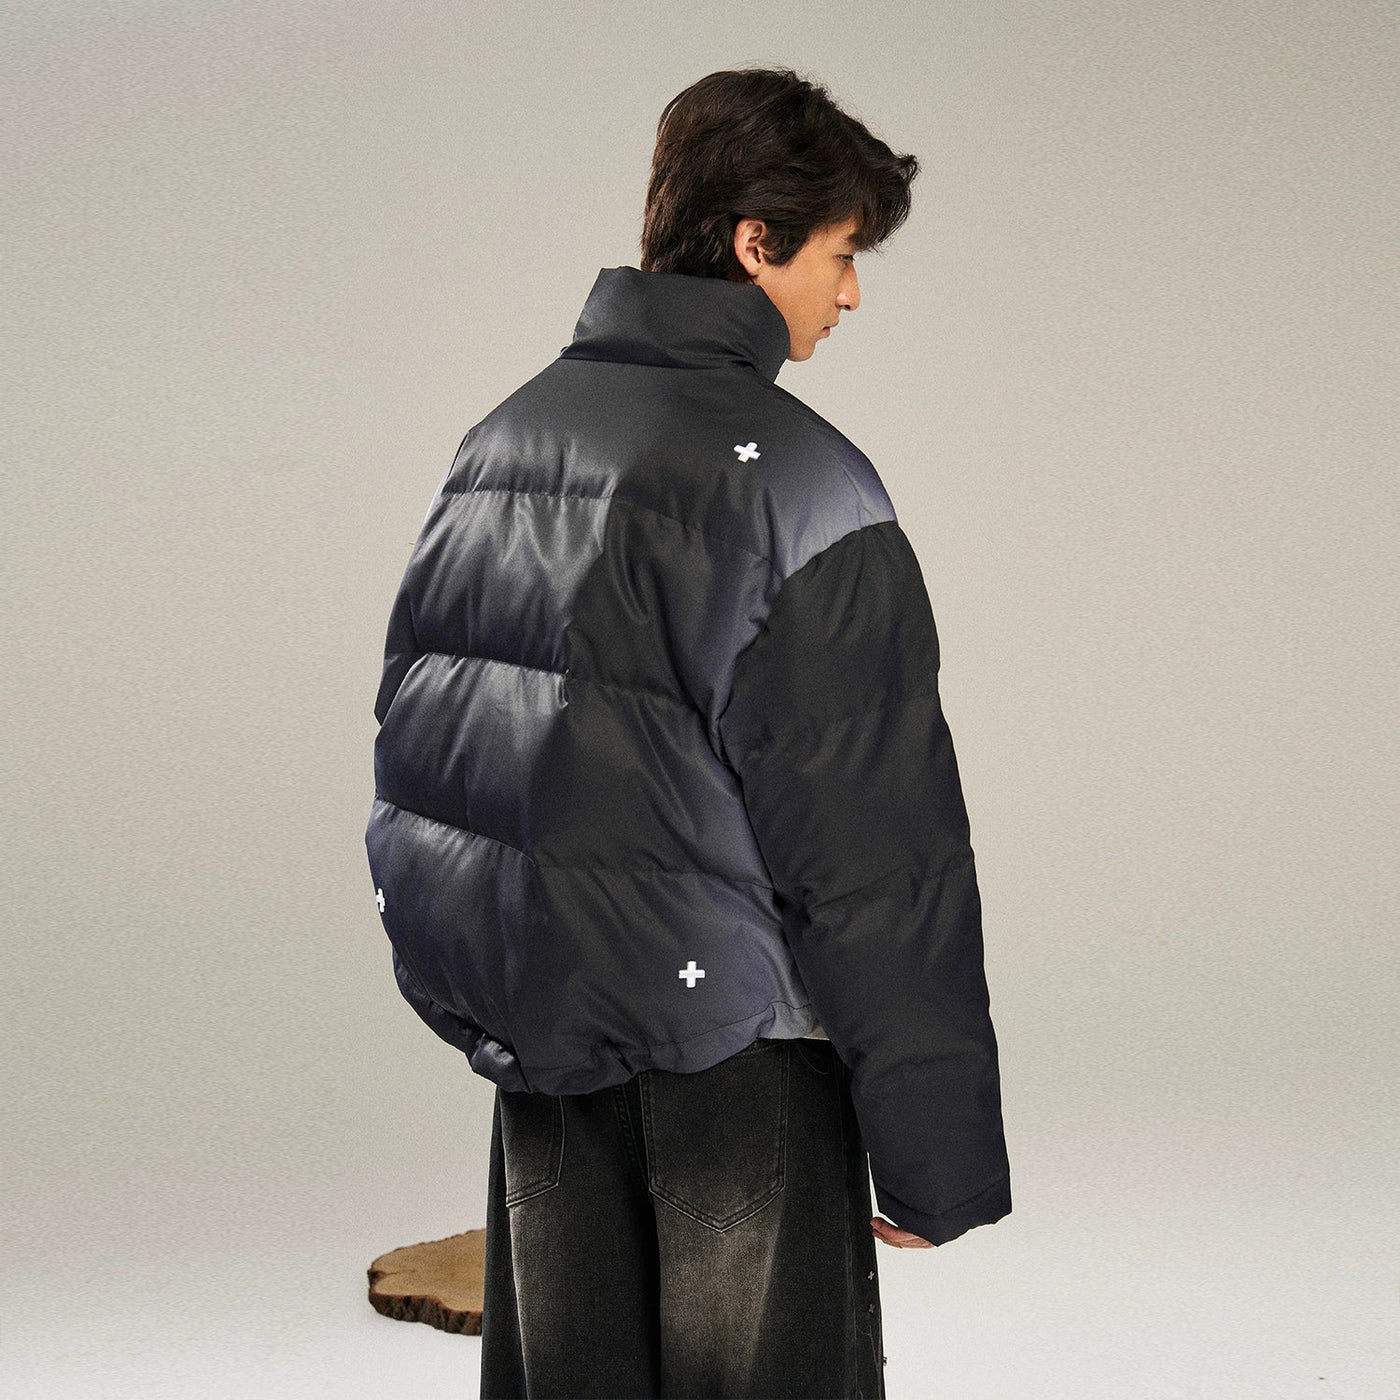 Shiny Boxy Fit Puffer Jacket Korean Street Fashion Jacket By New Start Shop Online at OH Vault